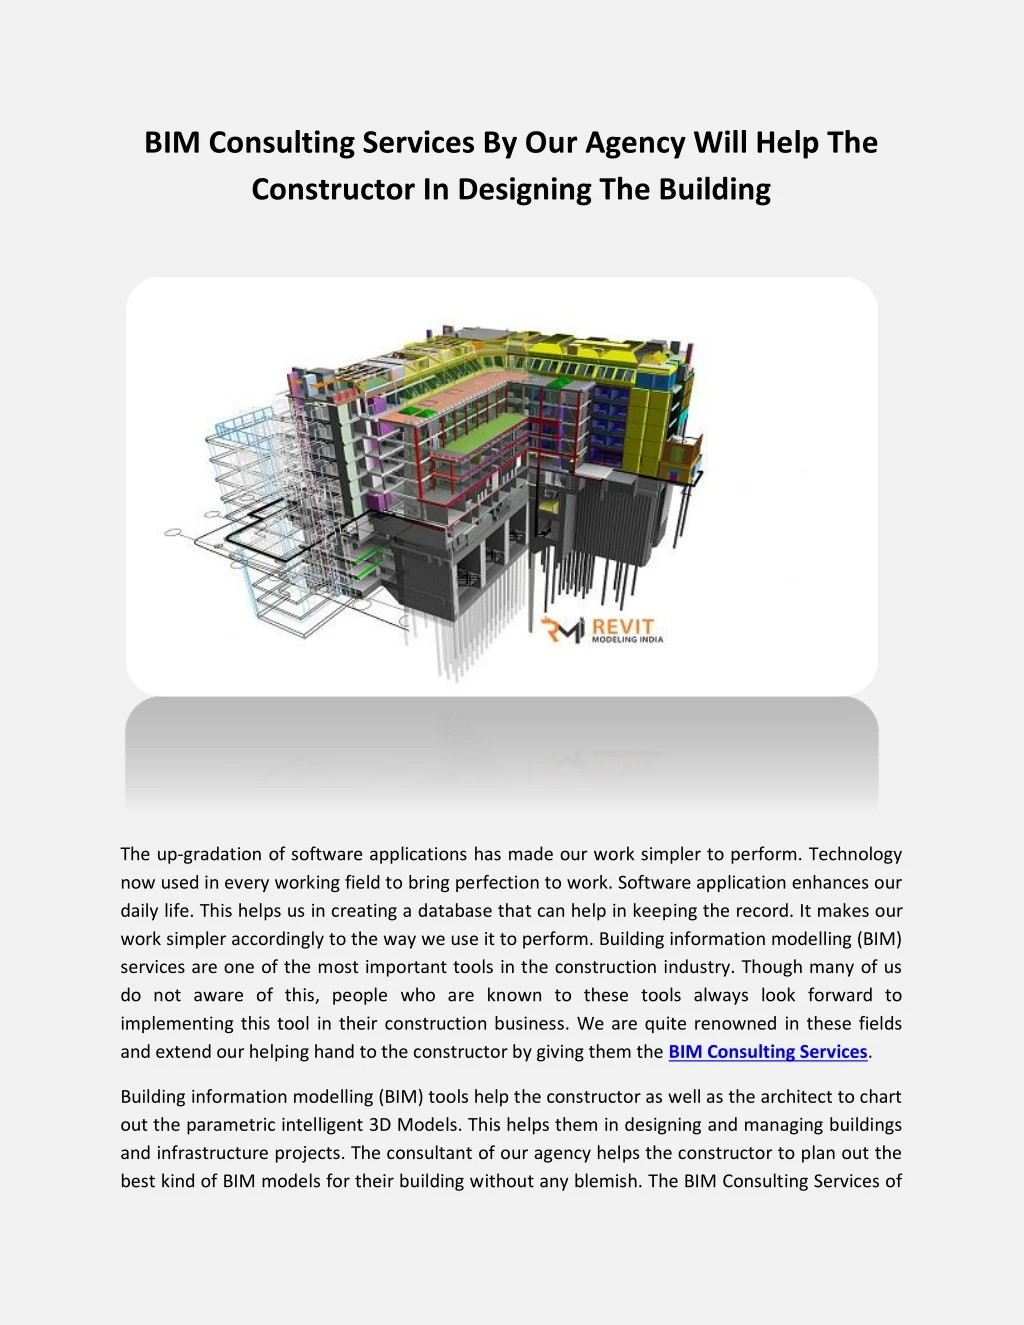 bim consulting services by our agency will help